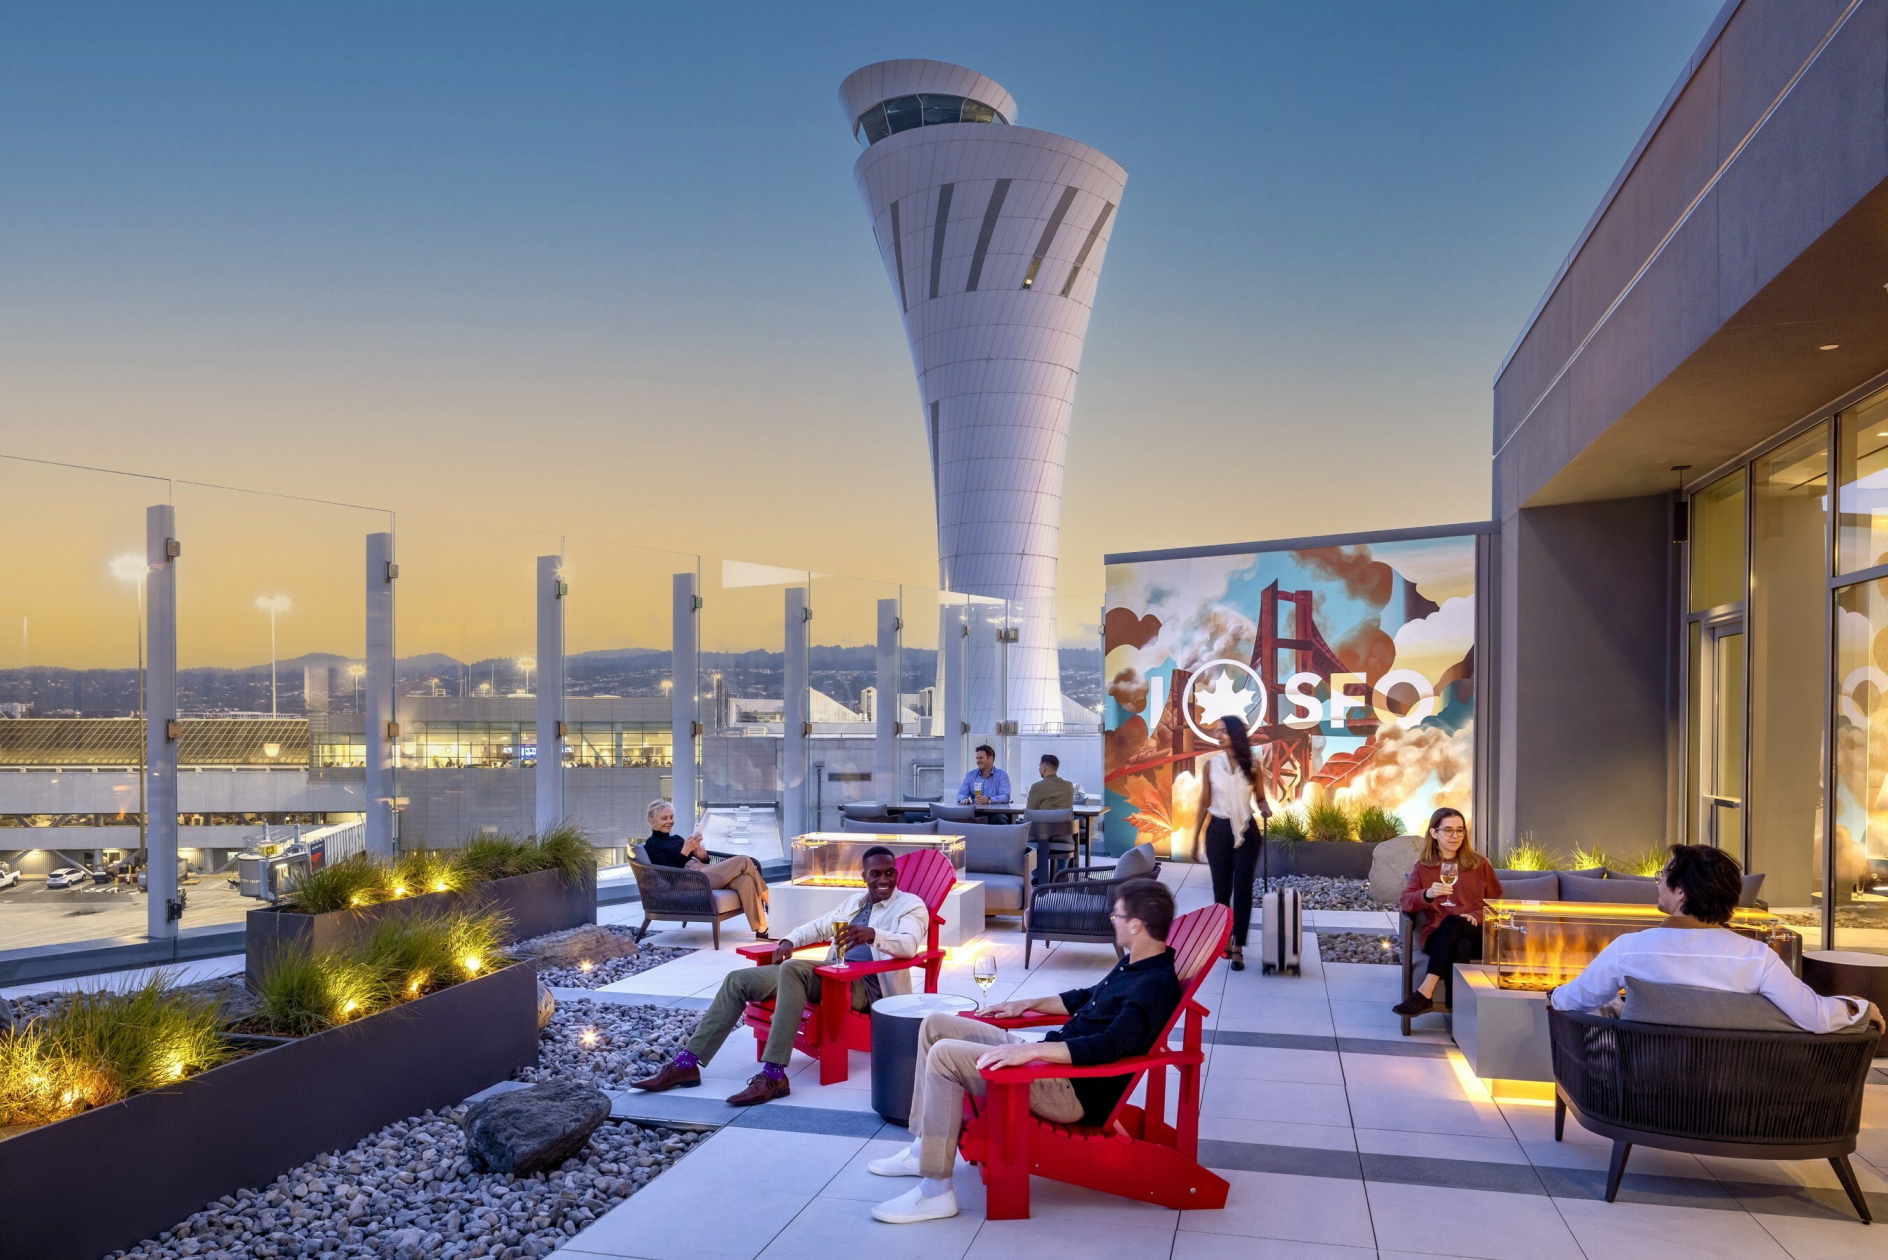 The new lounge at SFO features an outdoor terrace. Click to enlarge.